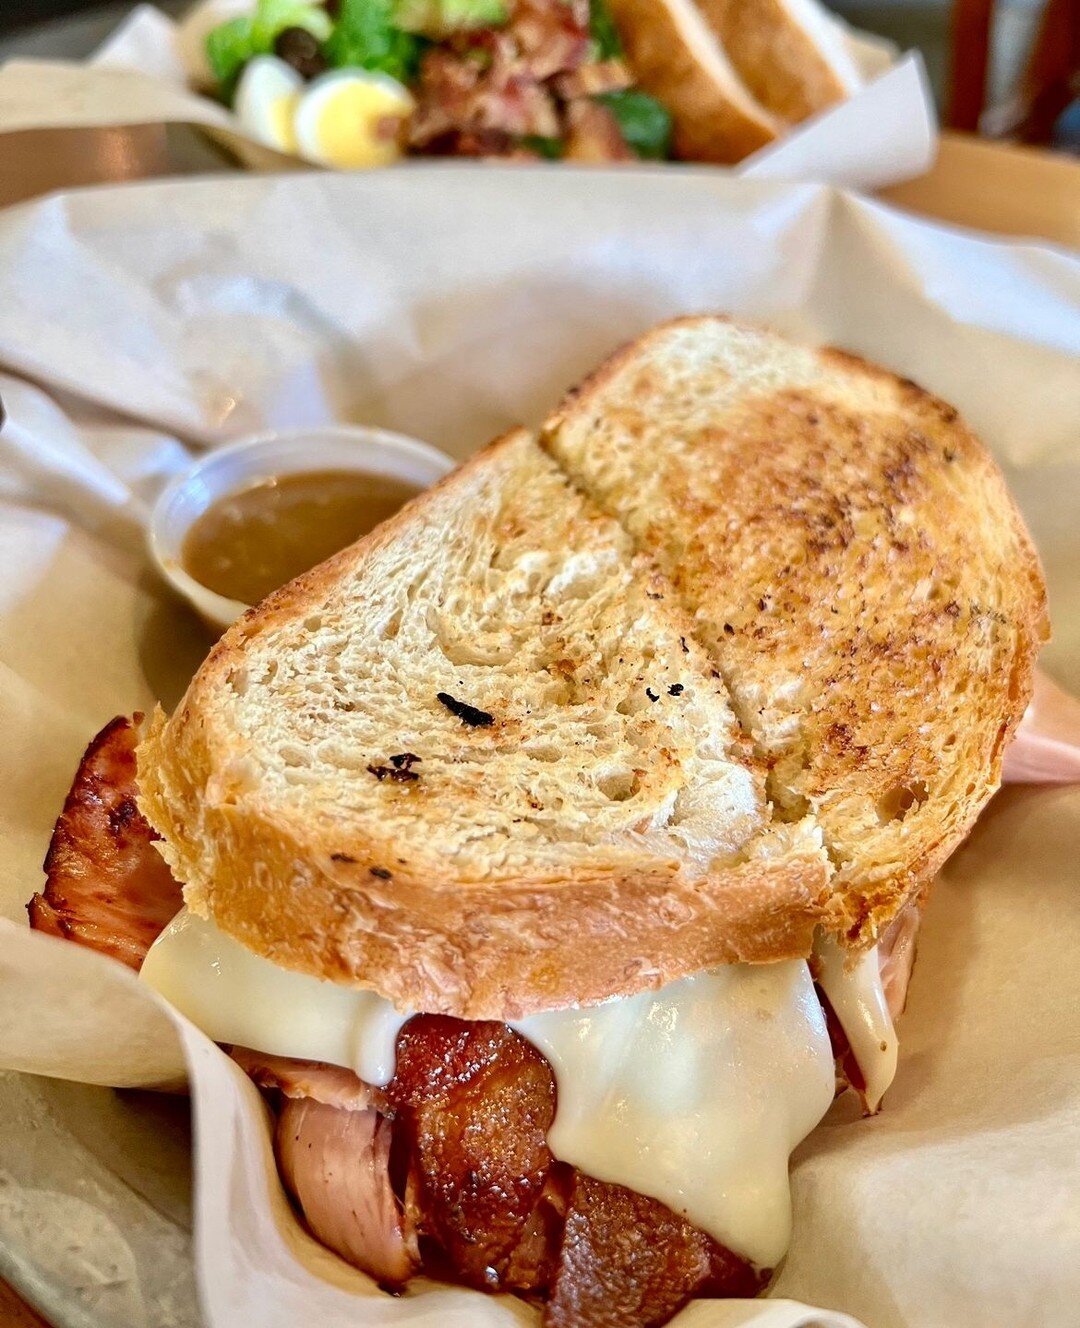 Our Pork, Pork&hellip;Mmm, Pork Sandwich is made with prosciutto, house ham, applewood bacon, salami, Swiss cheese, whole grain mustard, and house balsamic vinaigrette, all on Leoda&rsquo;s fresh butter white bread. Yum! 

#hawaiisbestkitchens #leoda